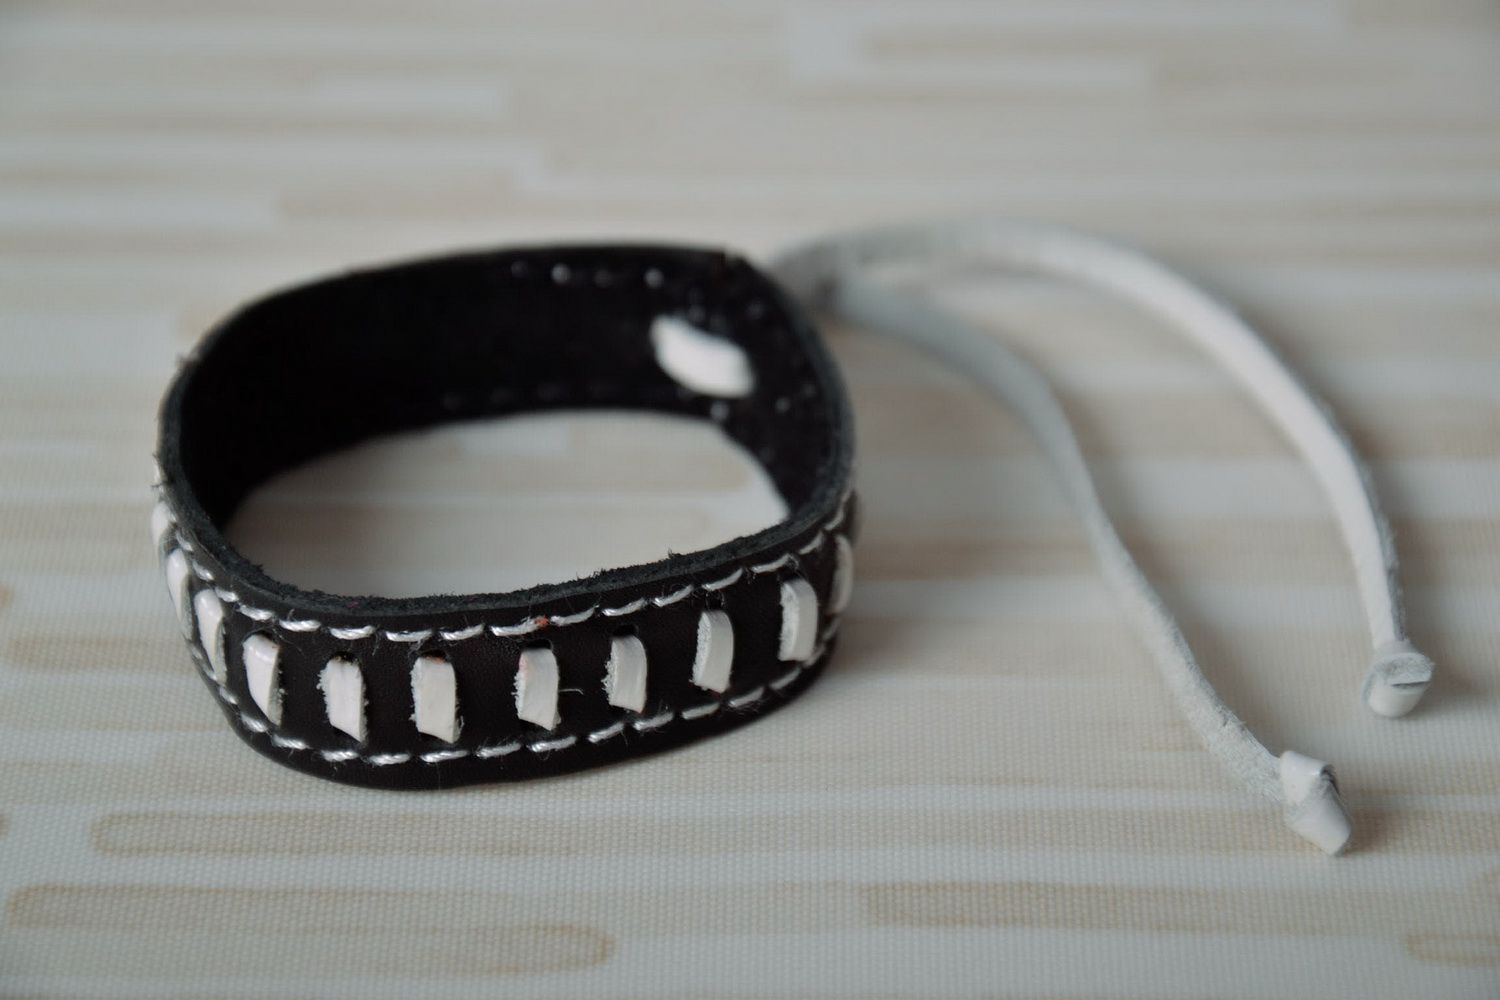 Bracelet made from genuine leather photo 1